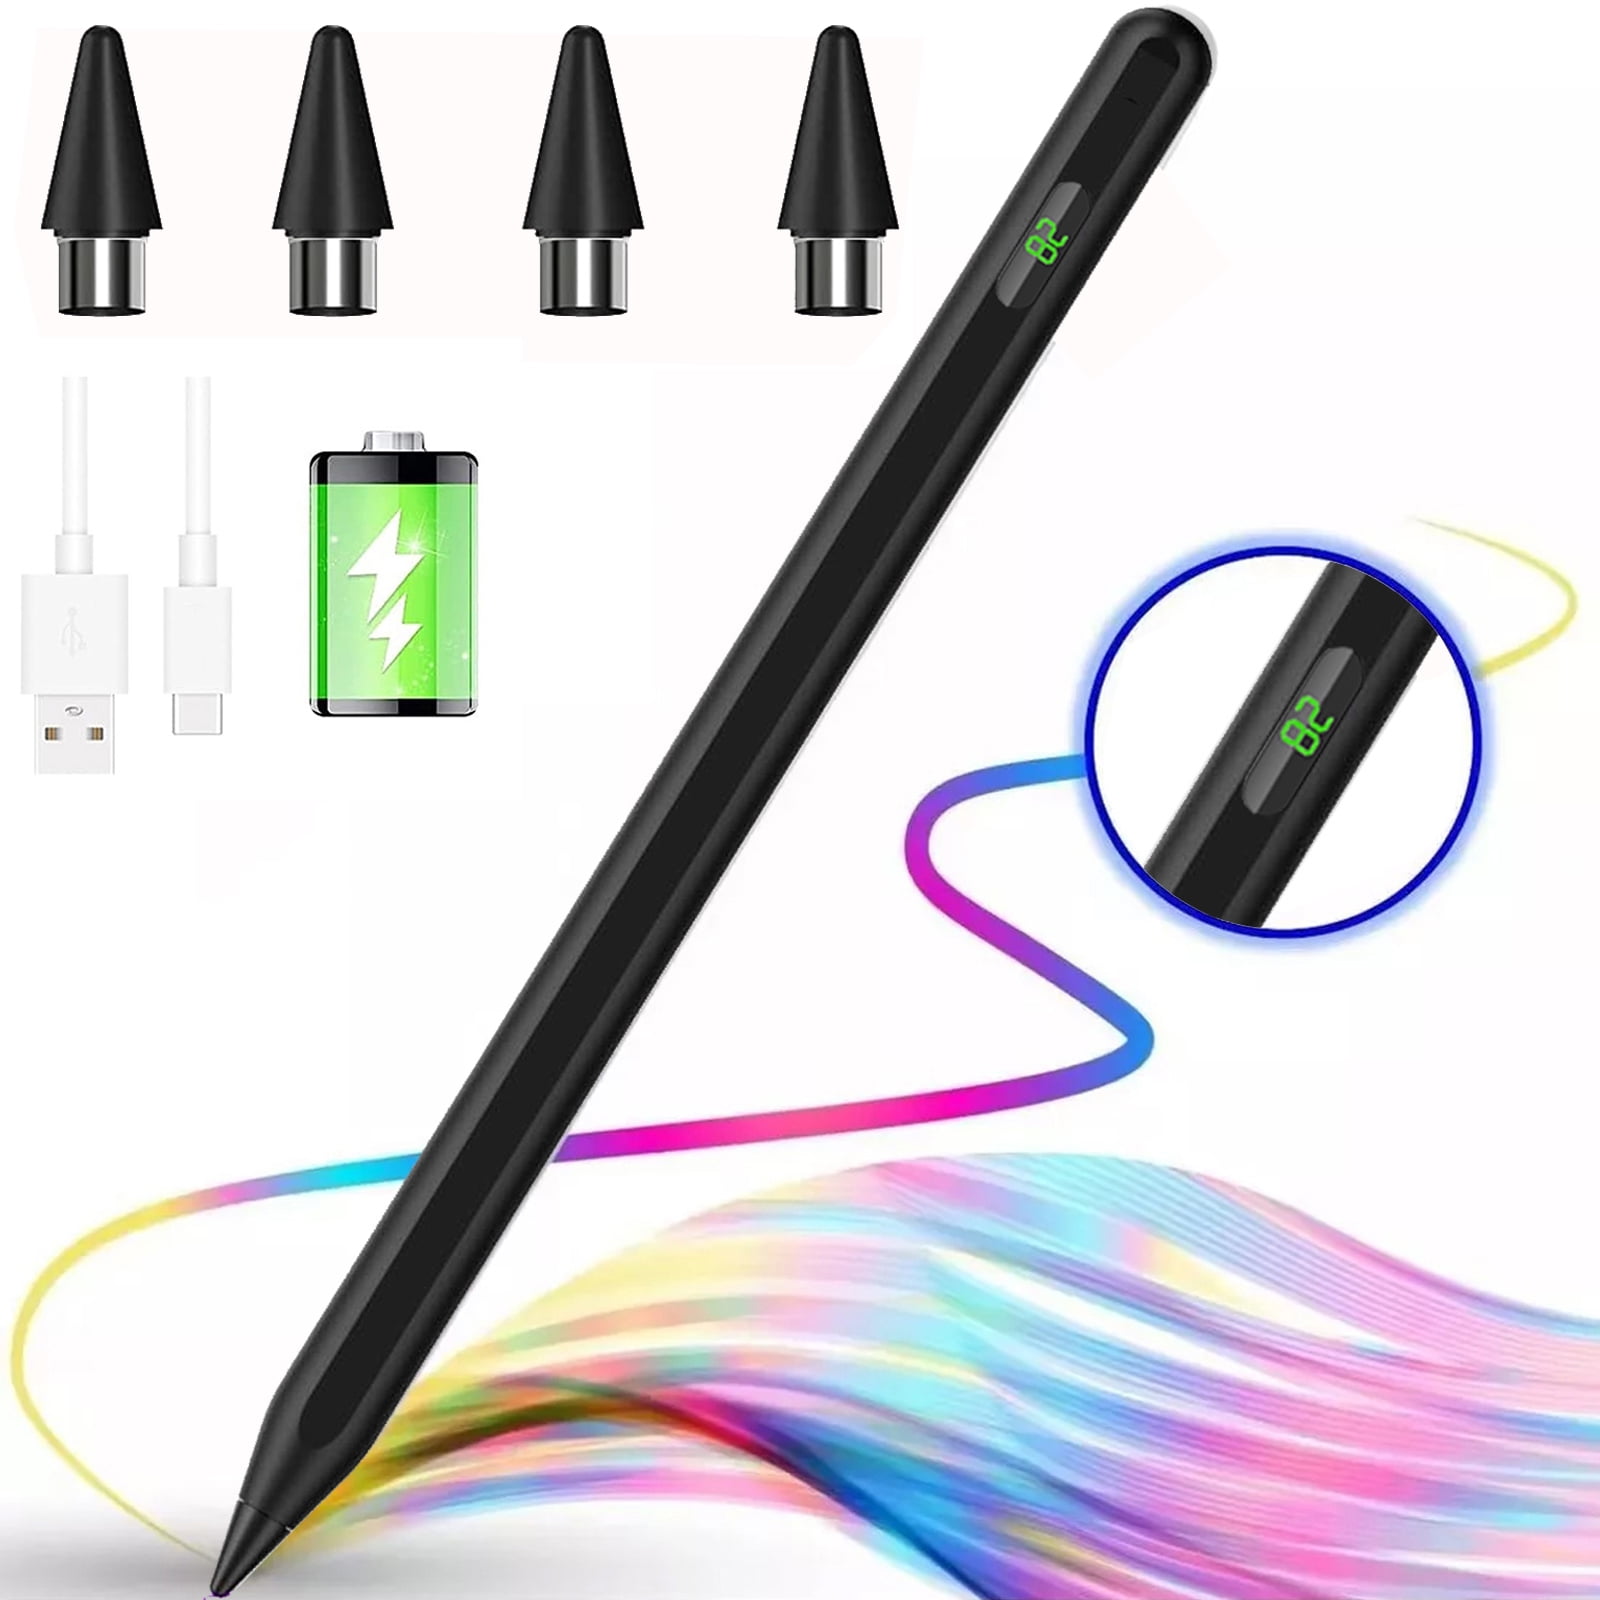  Touch Stylus Pen Replacement Tips/Nibs for Xiaomi - Smart Pen,  Tablet Screen Touch Replacement Pens Nib : Cell Phones & Accessories